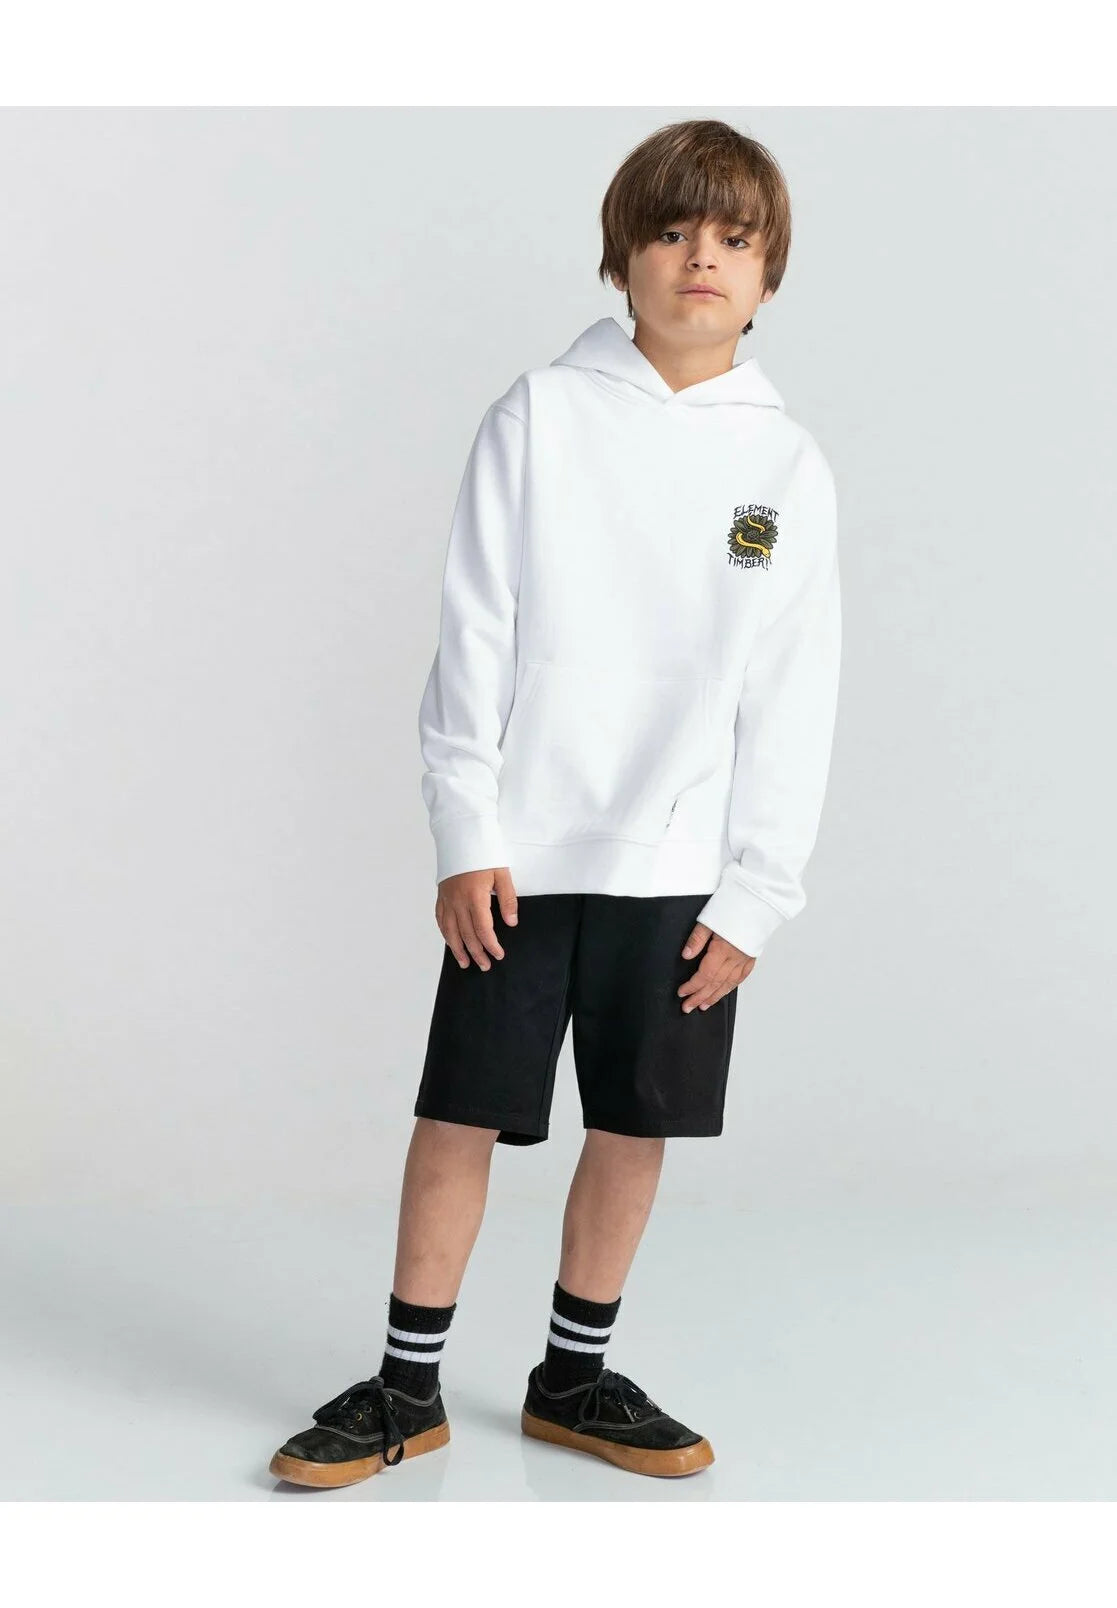 ELEMENT - COVERED HOOD YOUTH - OPTIC WHITE